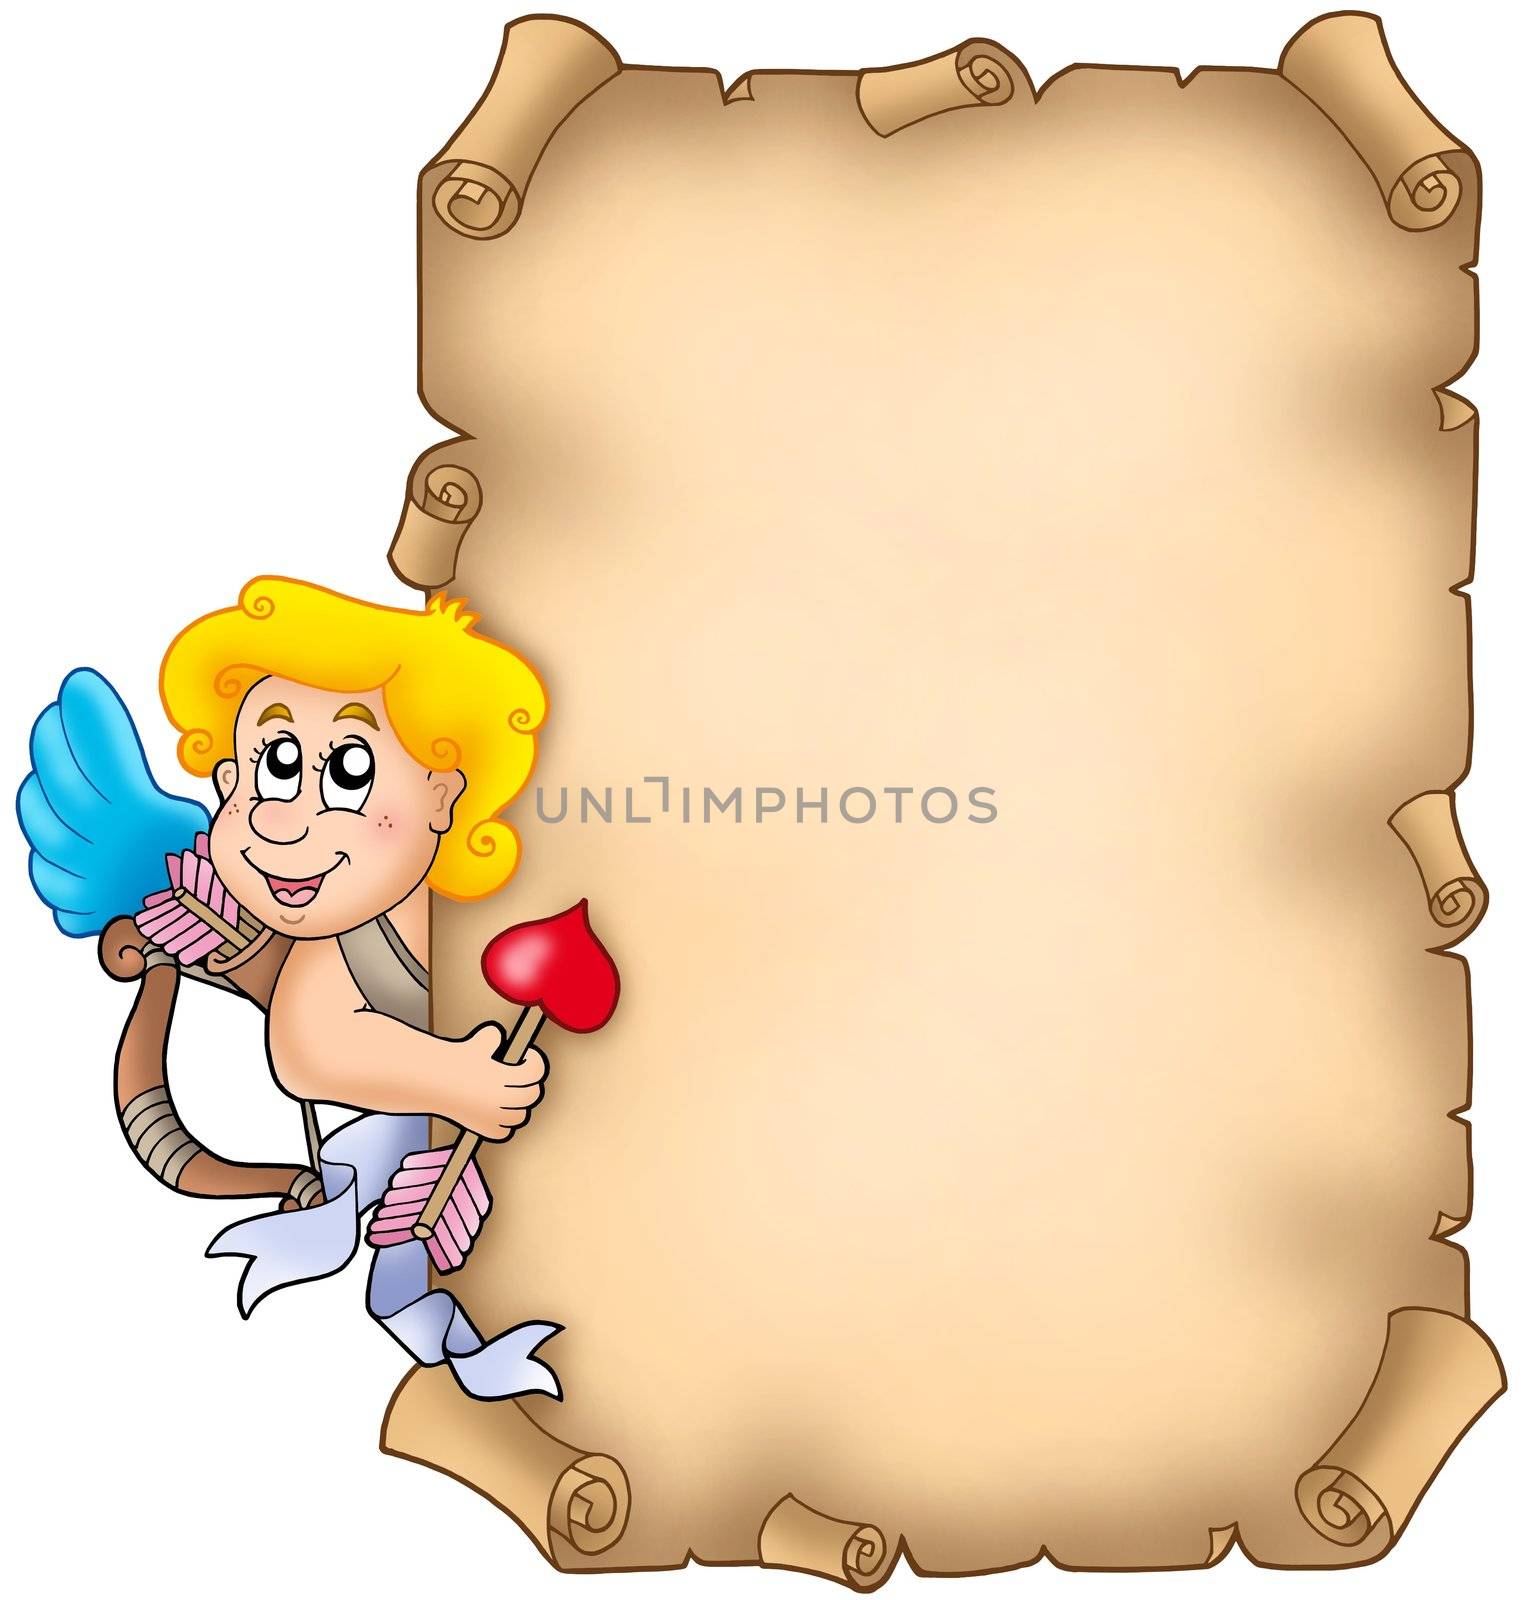 Valentine parchment with Cupid - color illustration.